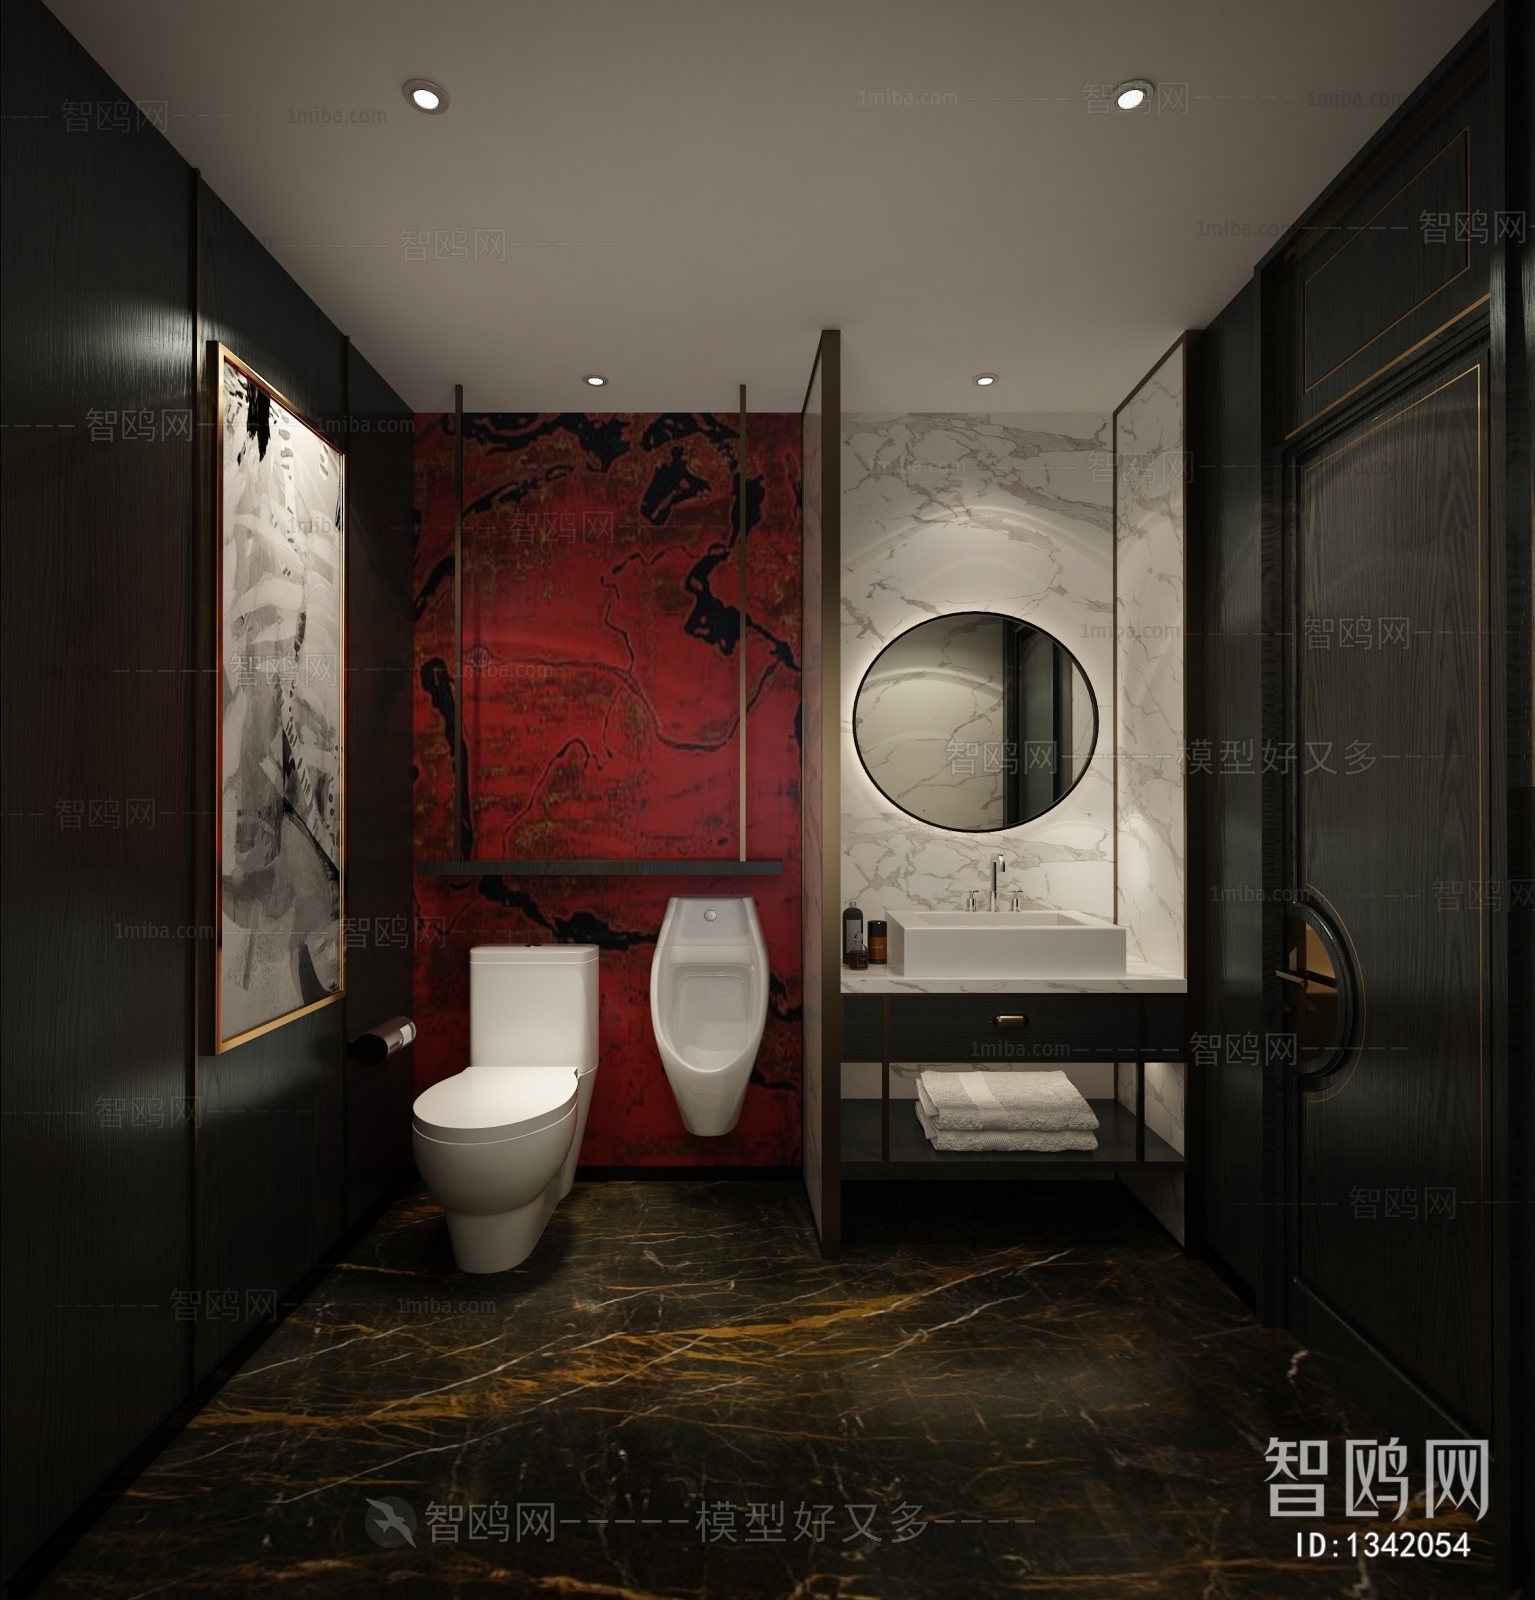 New Classical Style TOILET